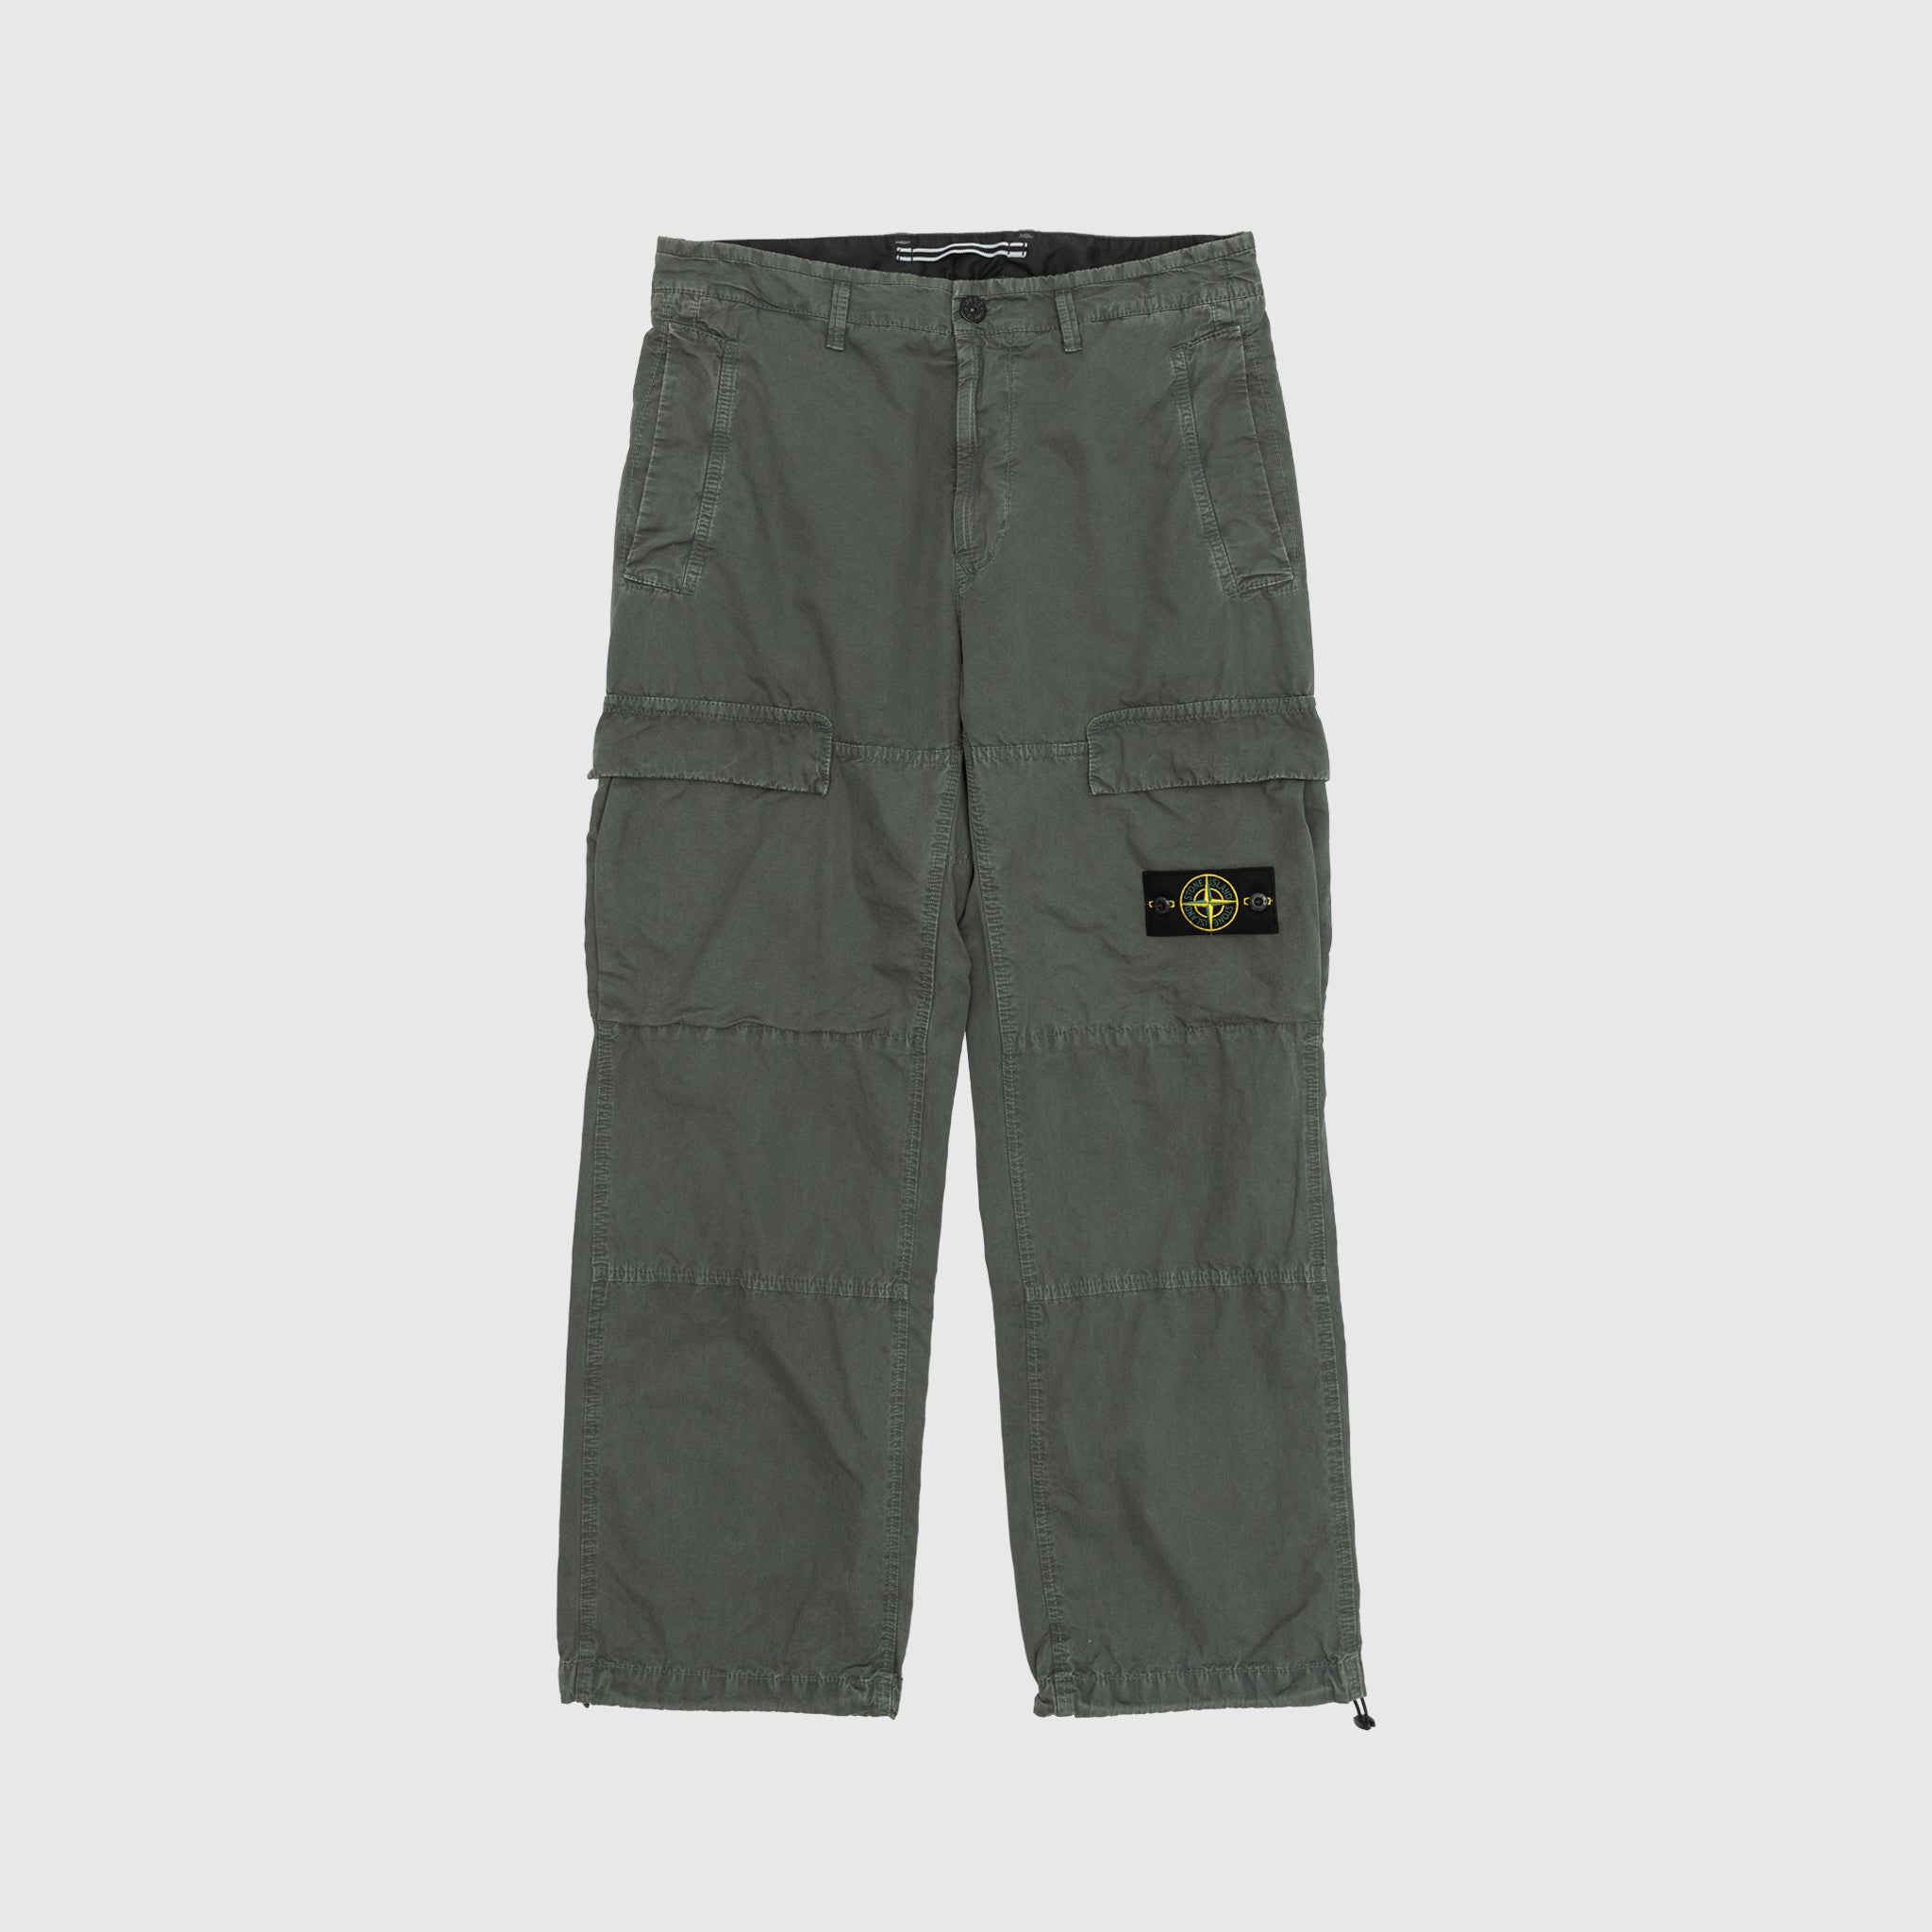 OLD' TREATMENT CARGO PANTS – PACKER SHOES